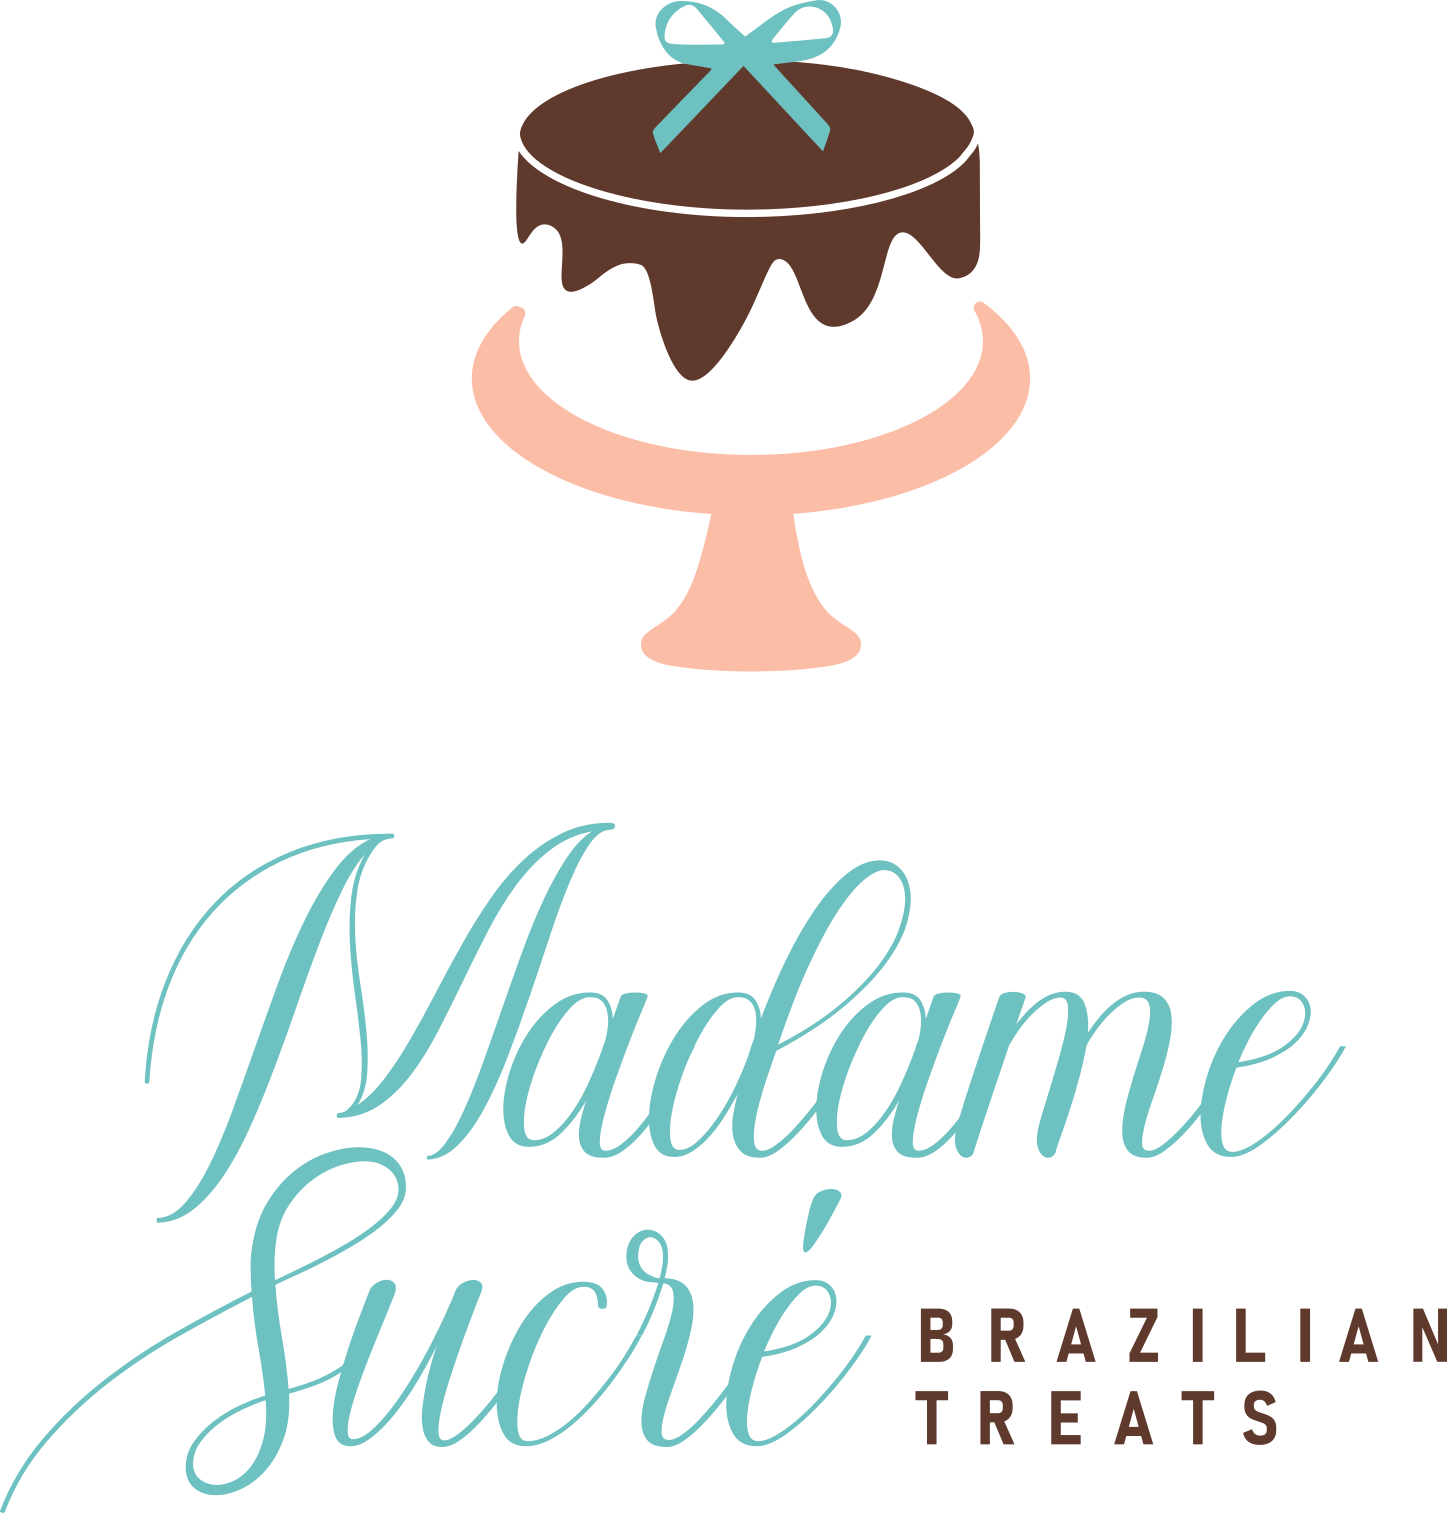 Madame Sucre Bakery